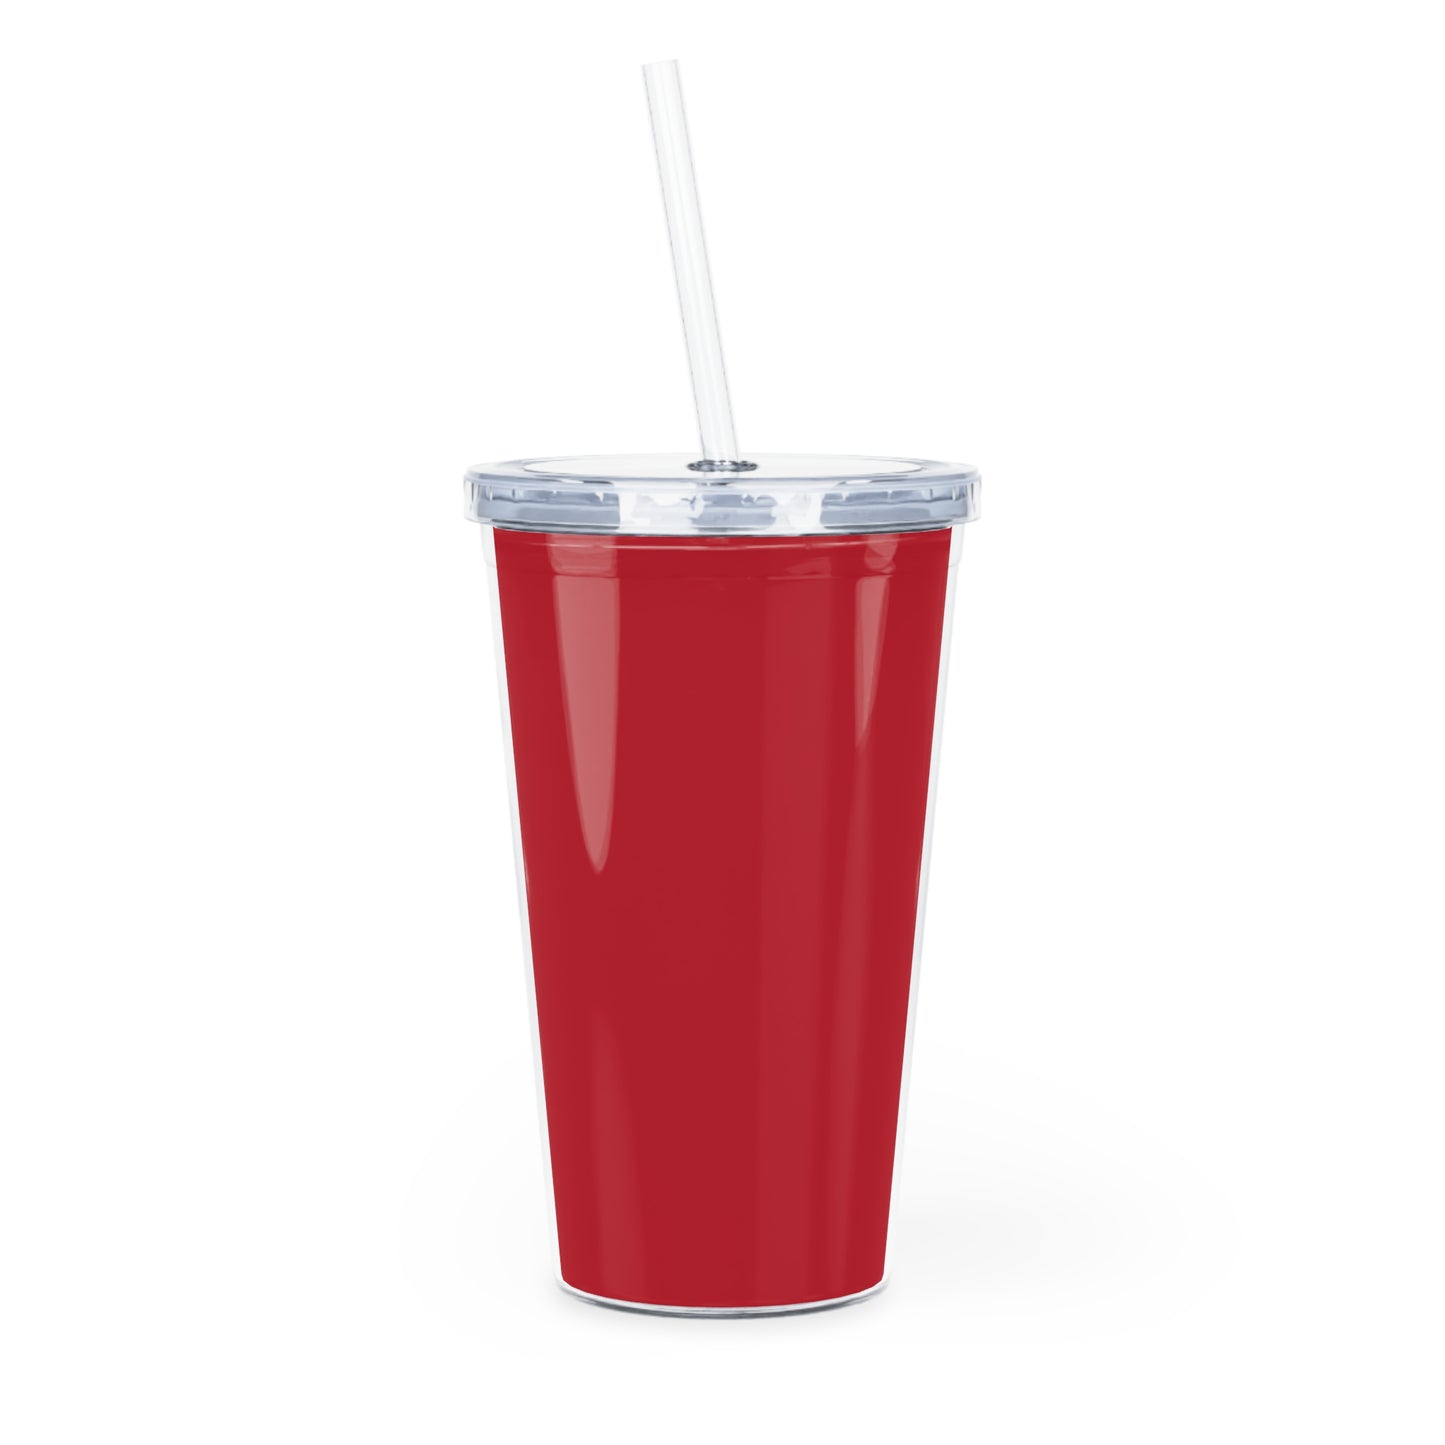 Grinchy Plastic Tumbler with Straw